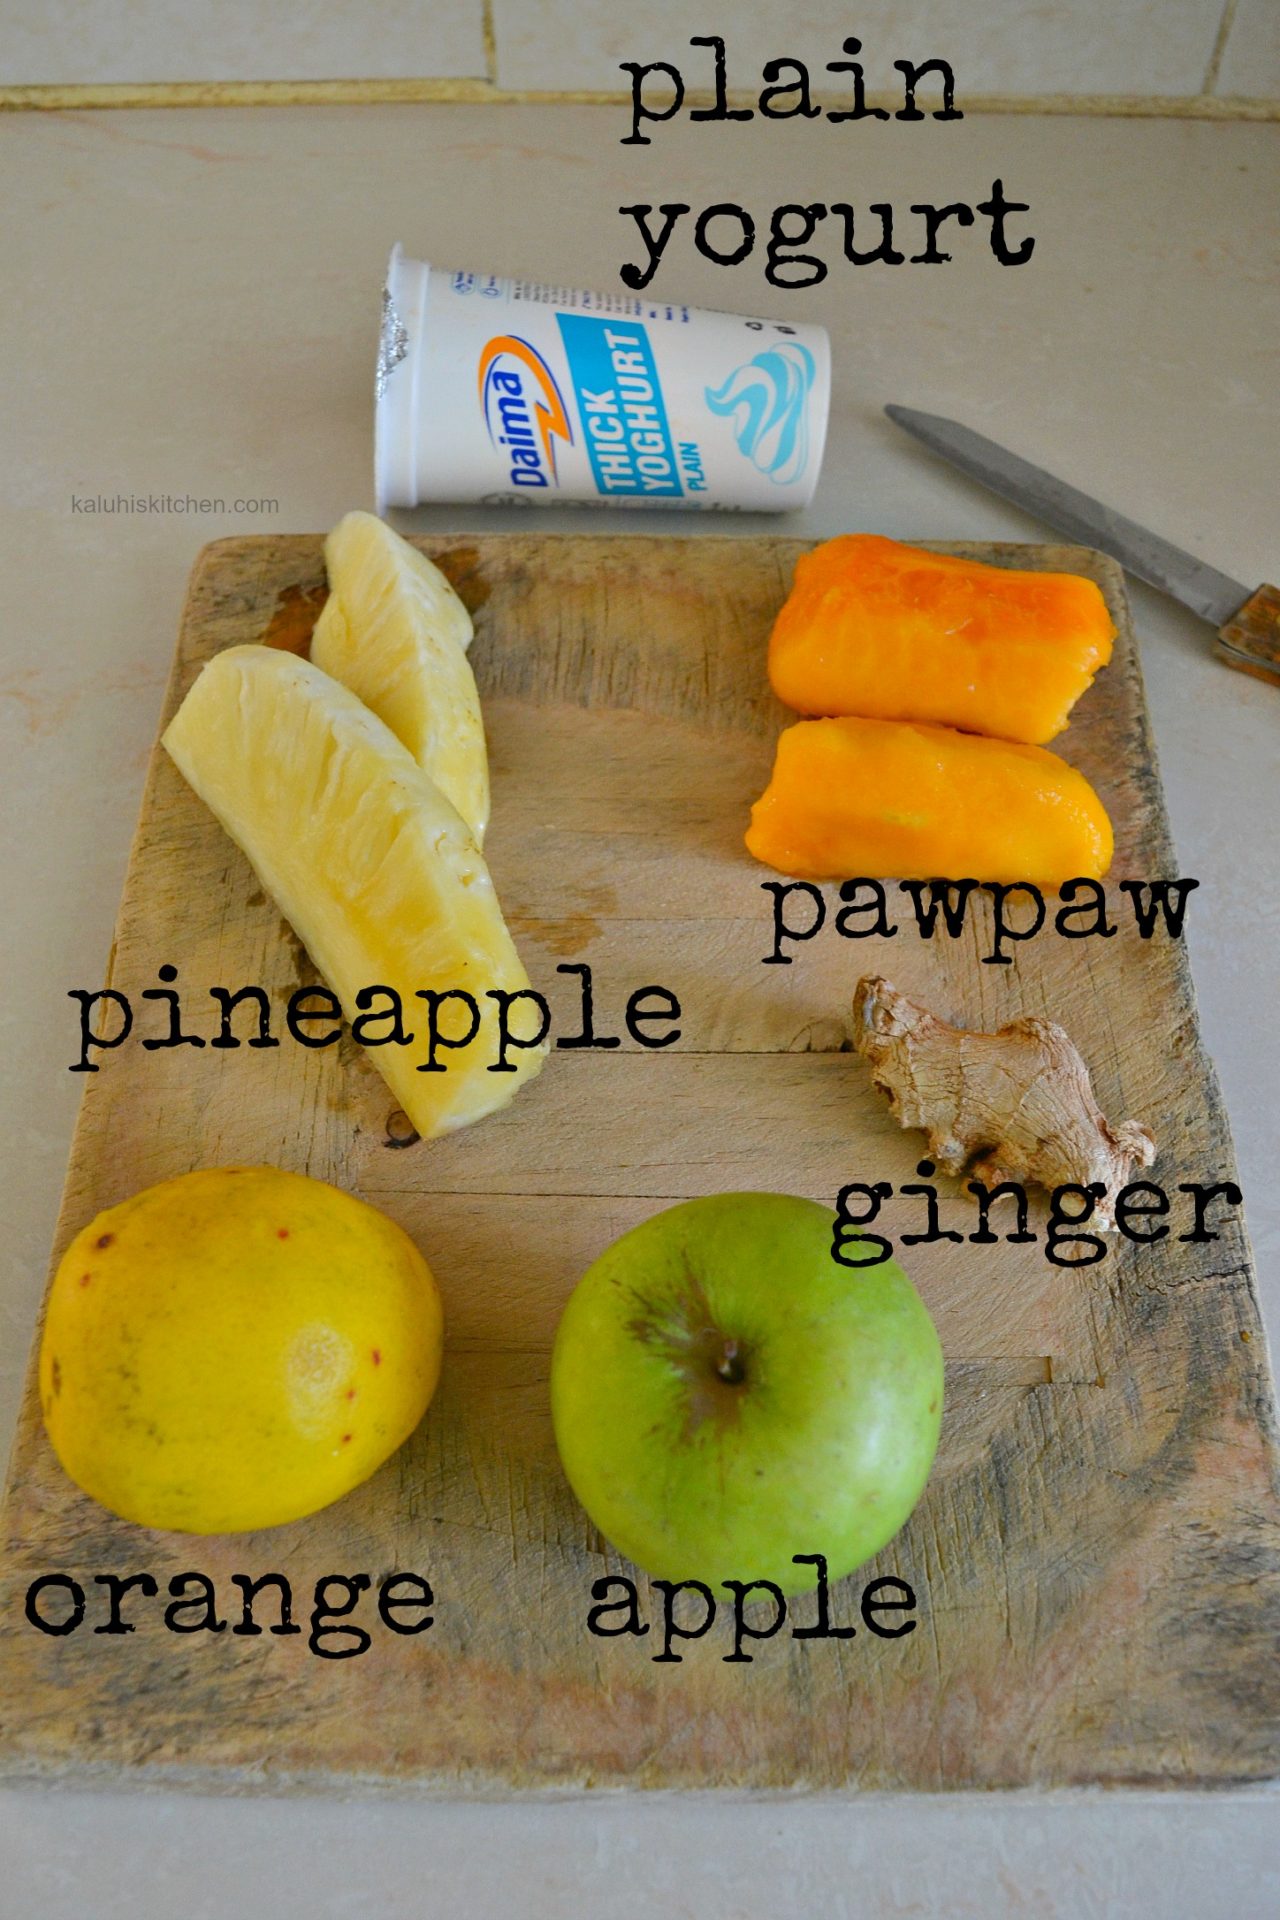 tropical smoothies_how to make a smoothie_orange and pineapple smoothie ingredients